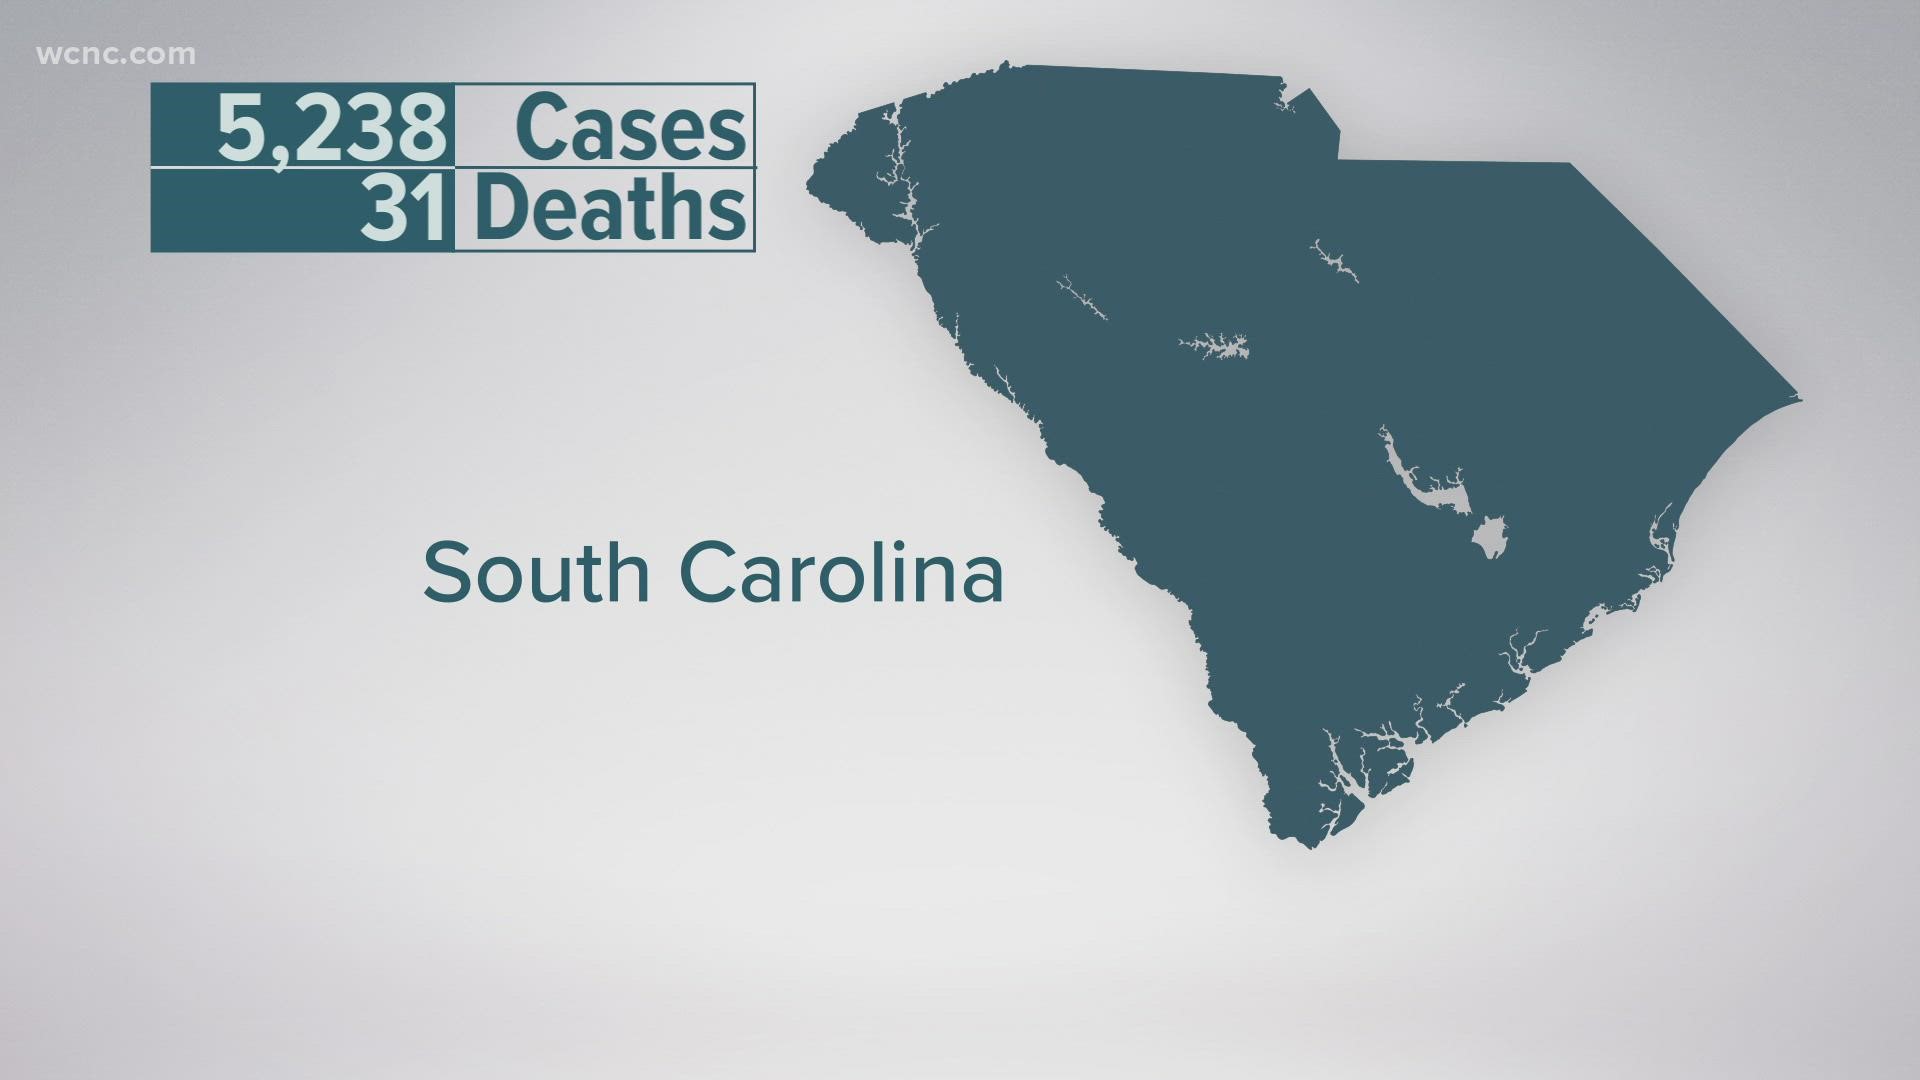 DHEC shows the rapid increase of COVID-19 positive cases in South Carolina schools over the past week.